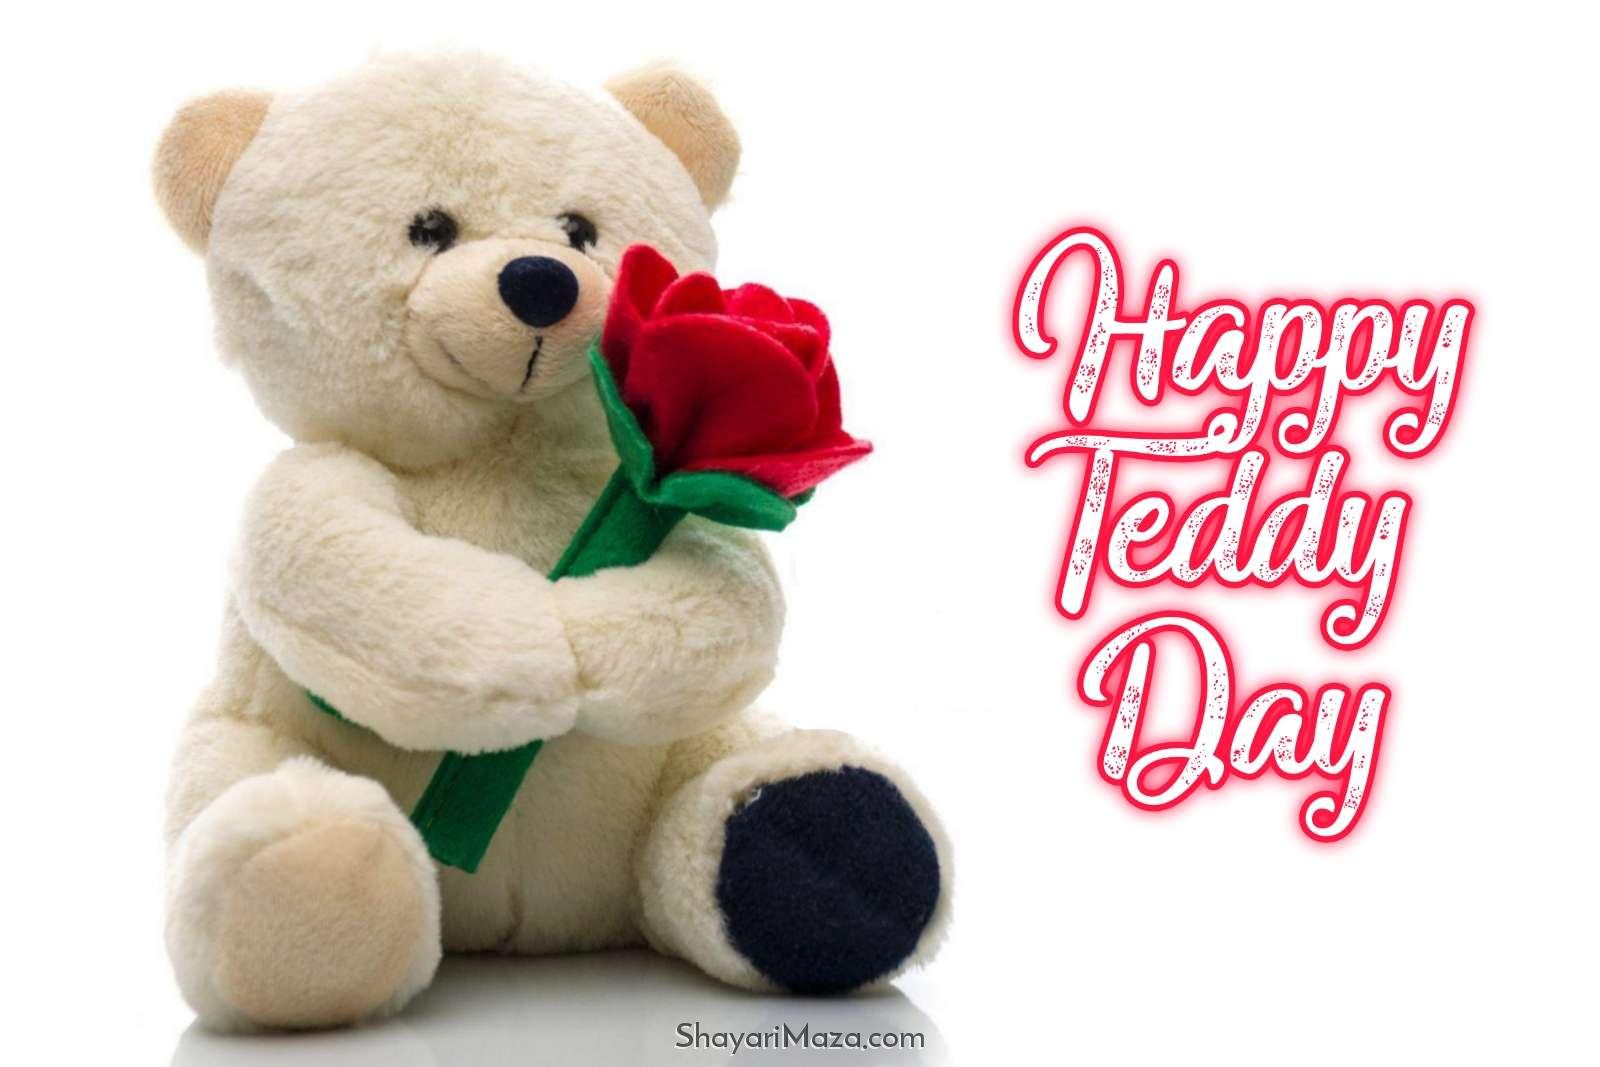 Happy Teddy Day Pic 2022 Download